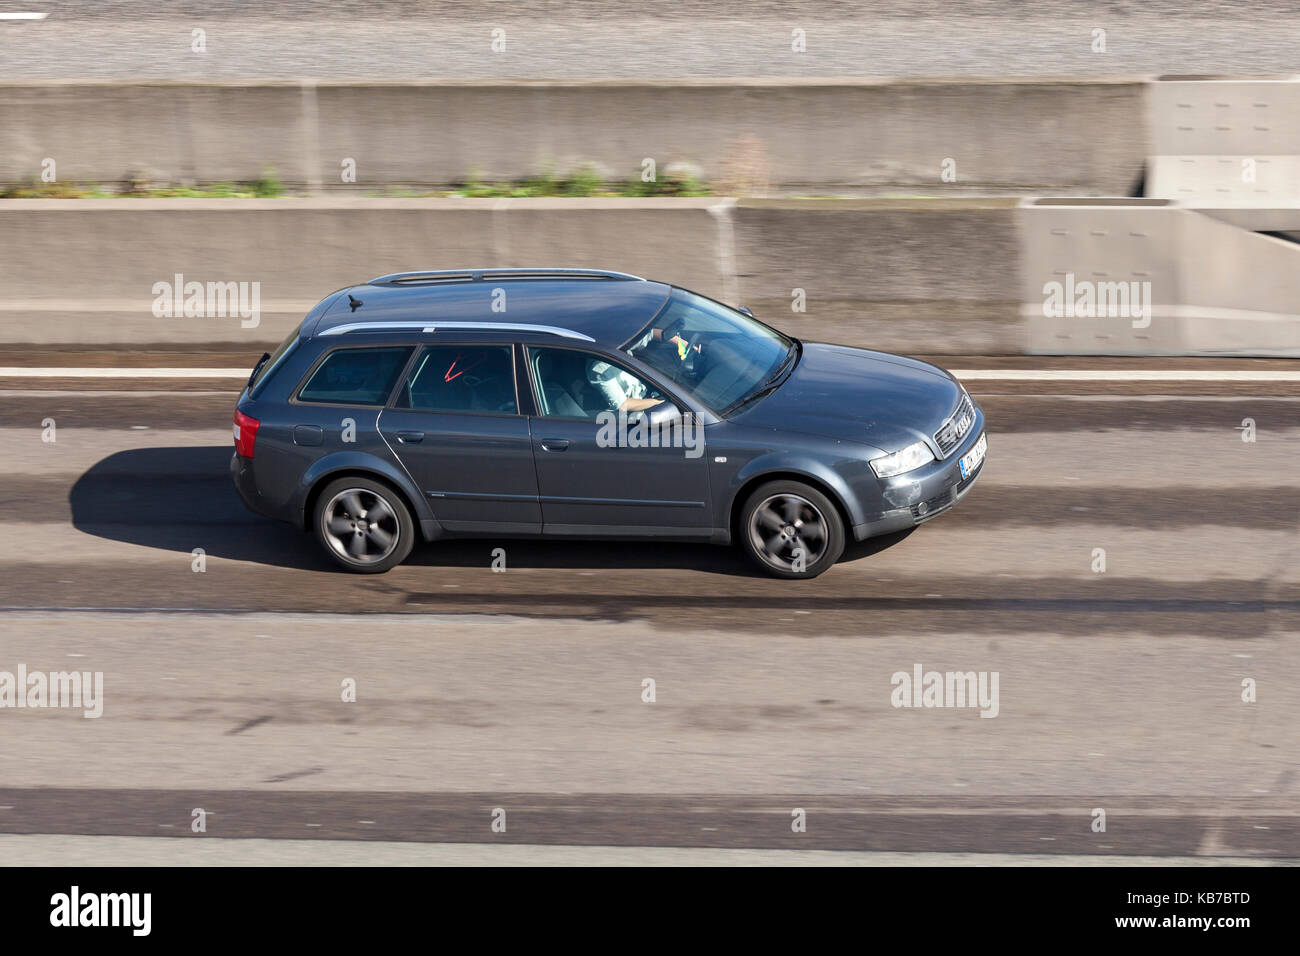 Frankfurt, Germany - Sep 19, 2017: Audi A4 Avant B6 from ca. 2006 driving on the highway in Germany Stock Photo